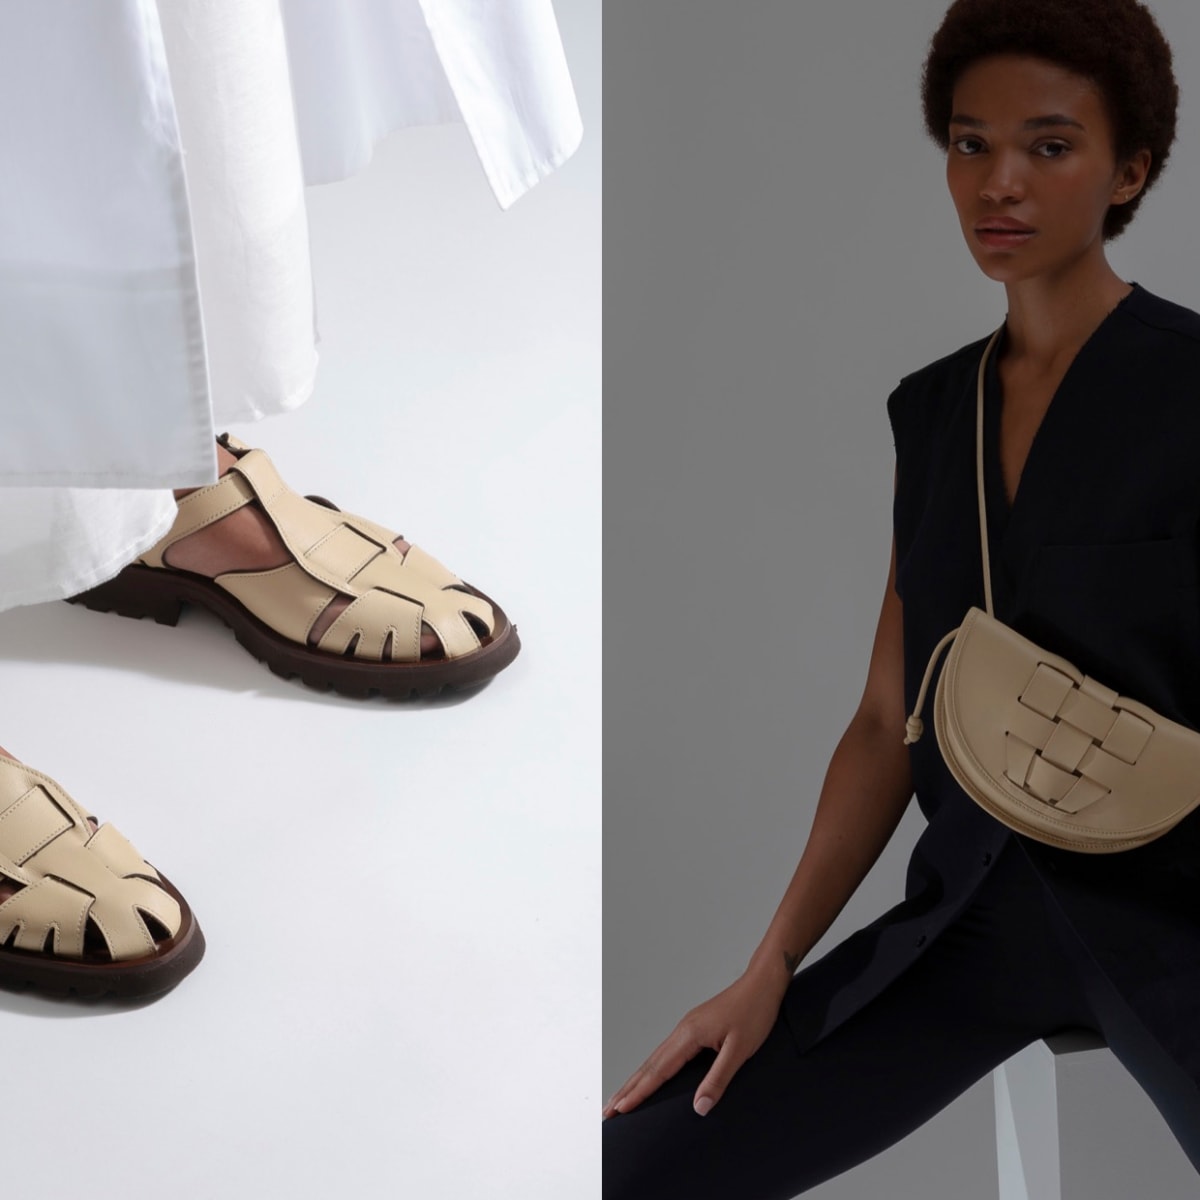 The Justin Bieber-Inspired Brand Making Luxury Hotel Slippers You